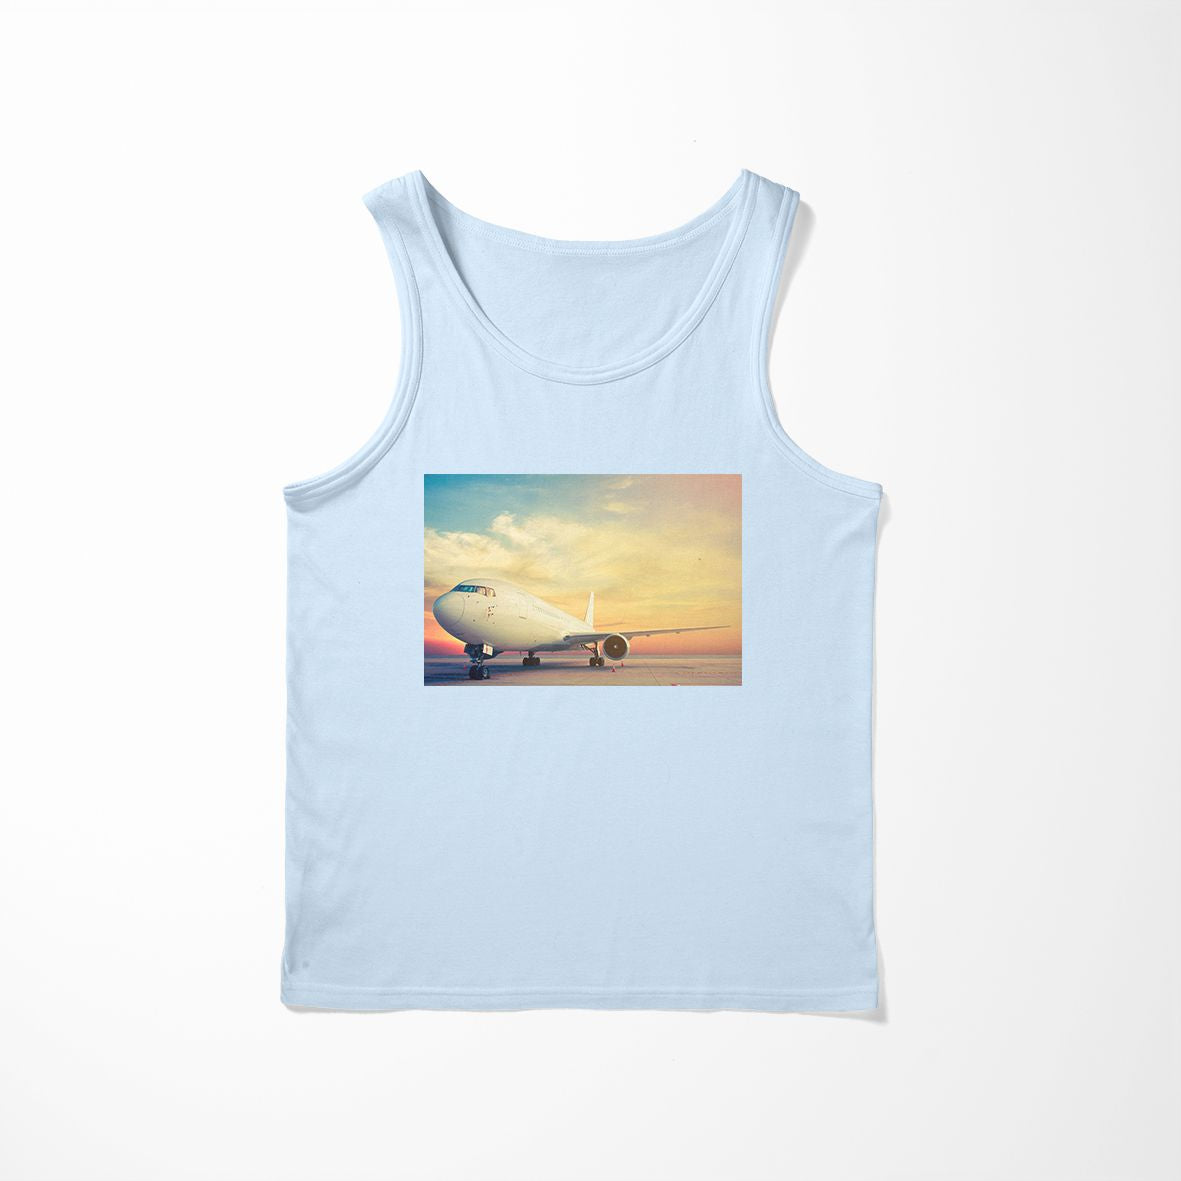 Parked Aircraft During Sunset Designed Tank Tops